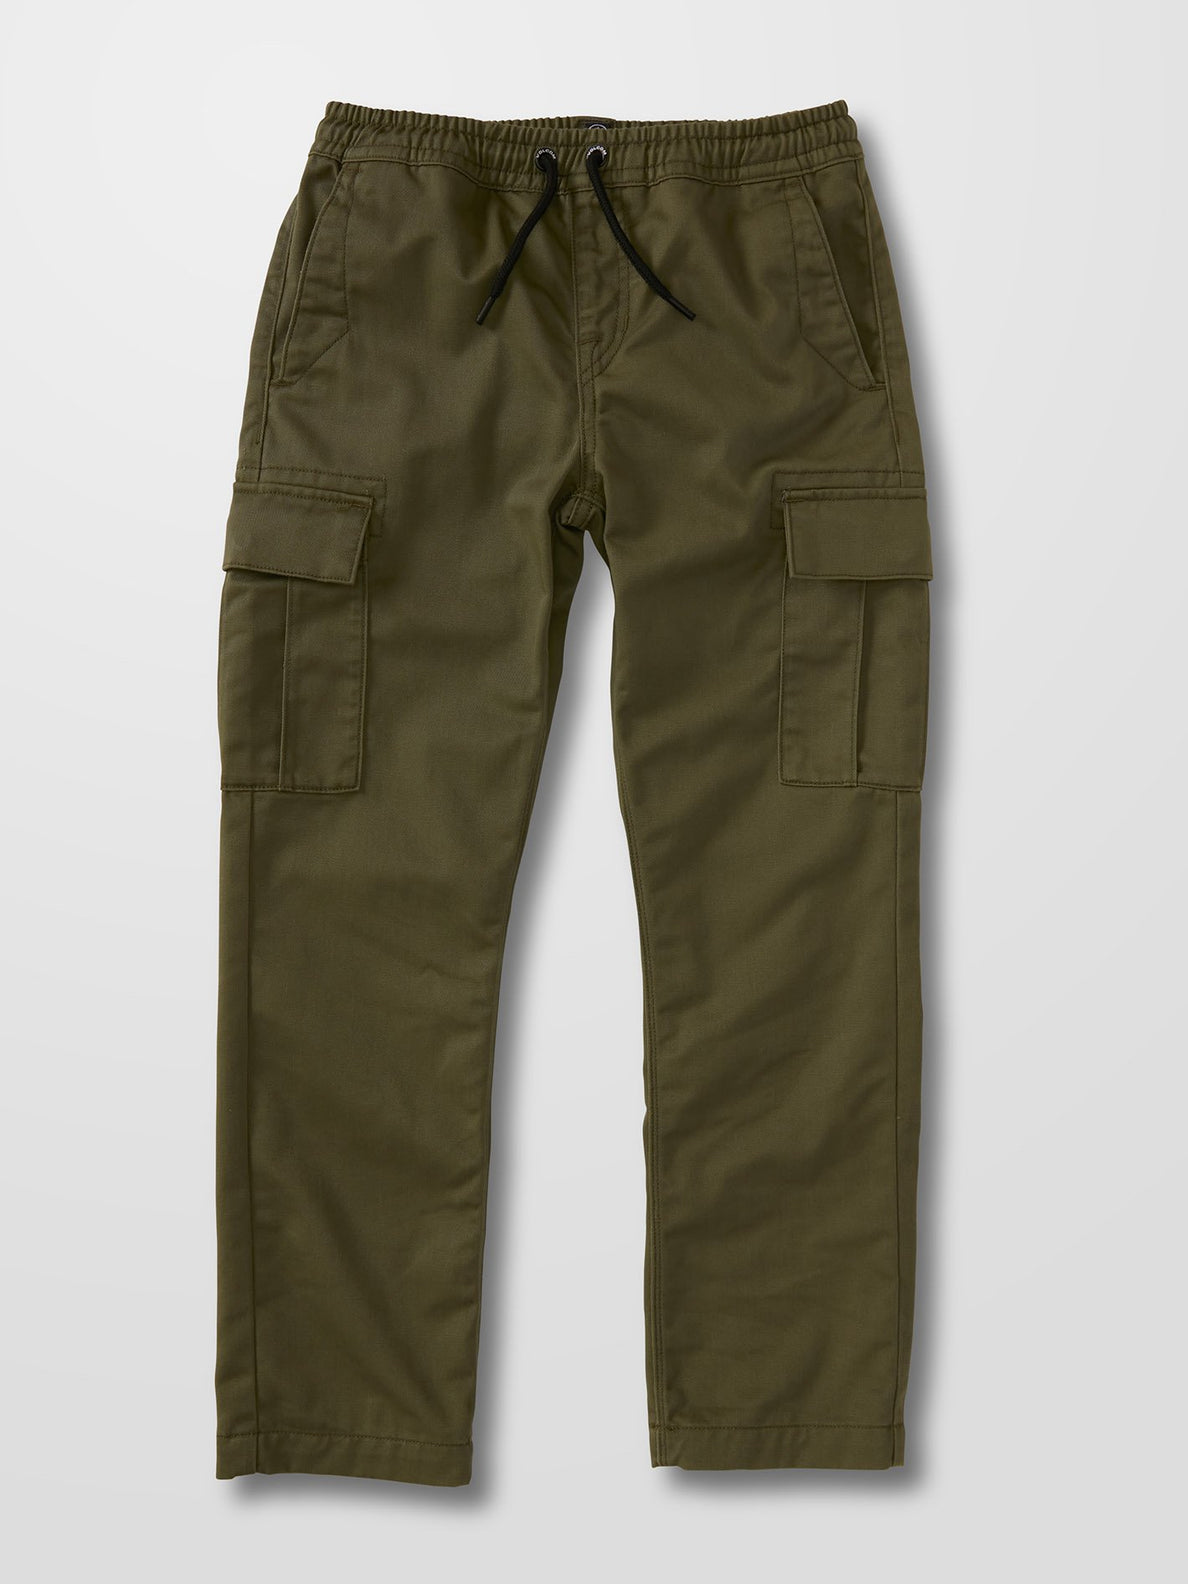 March Cargo Pant - MILITARY - (BOYS) (C1232130_MIL) [F]